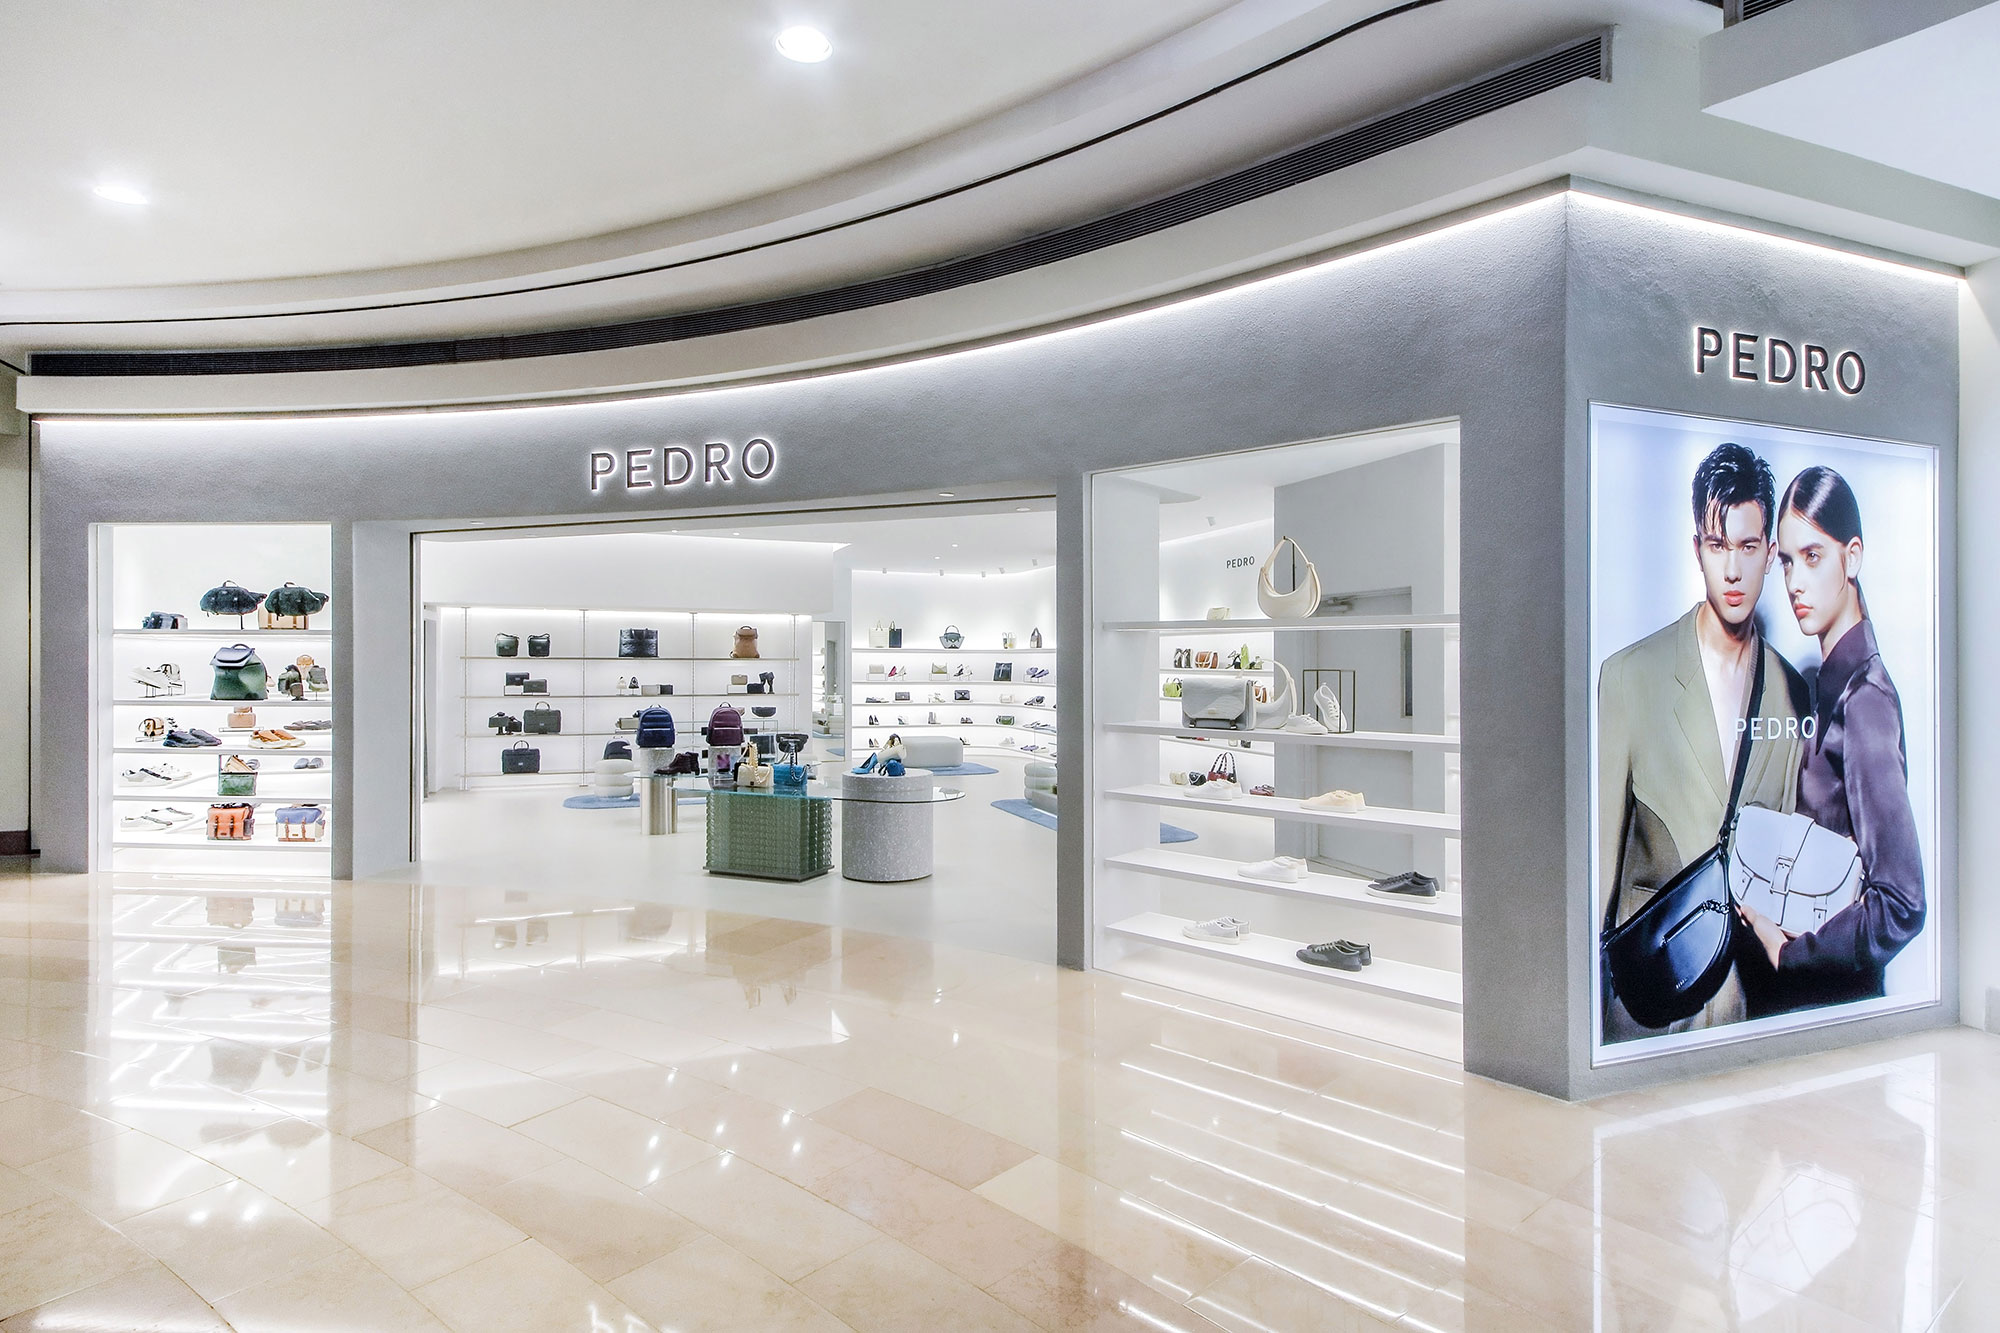 PEDRO Taipei 101 marks the brand’s first store opening in Taiwan. Designed to look and feel like an art gallery, the store features a clean and minimal aesthetic that represents the brand’s signature style of effortless essentials. Adding visual focus with subtle colouring, the space offers a breaking retail experience for the style-driven consumers of the city.